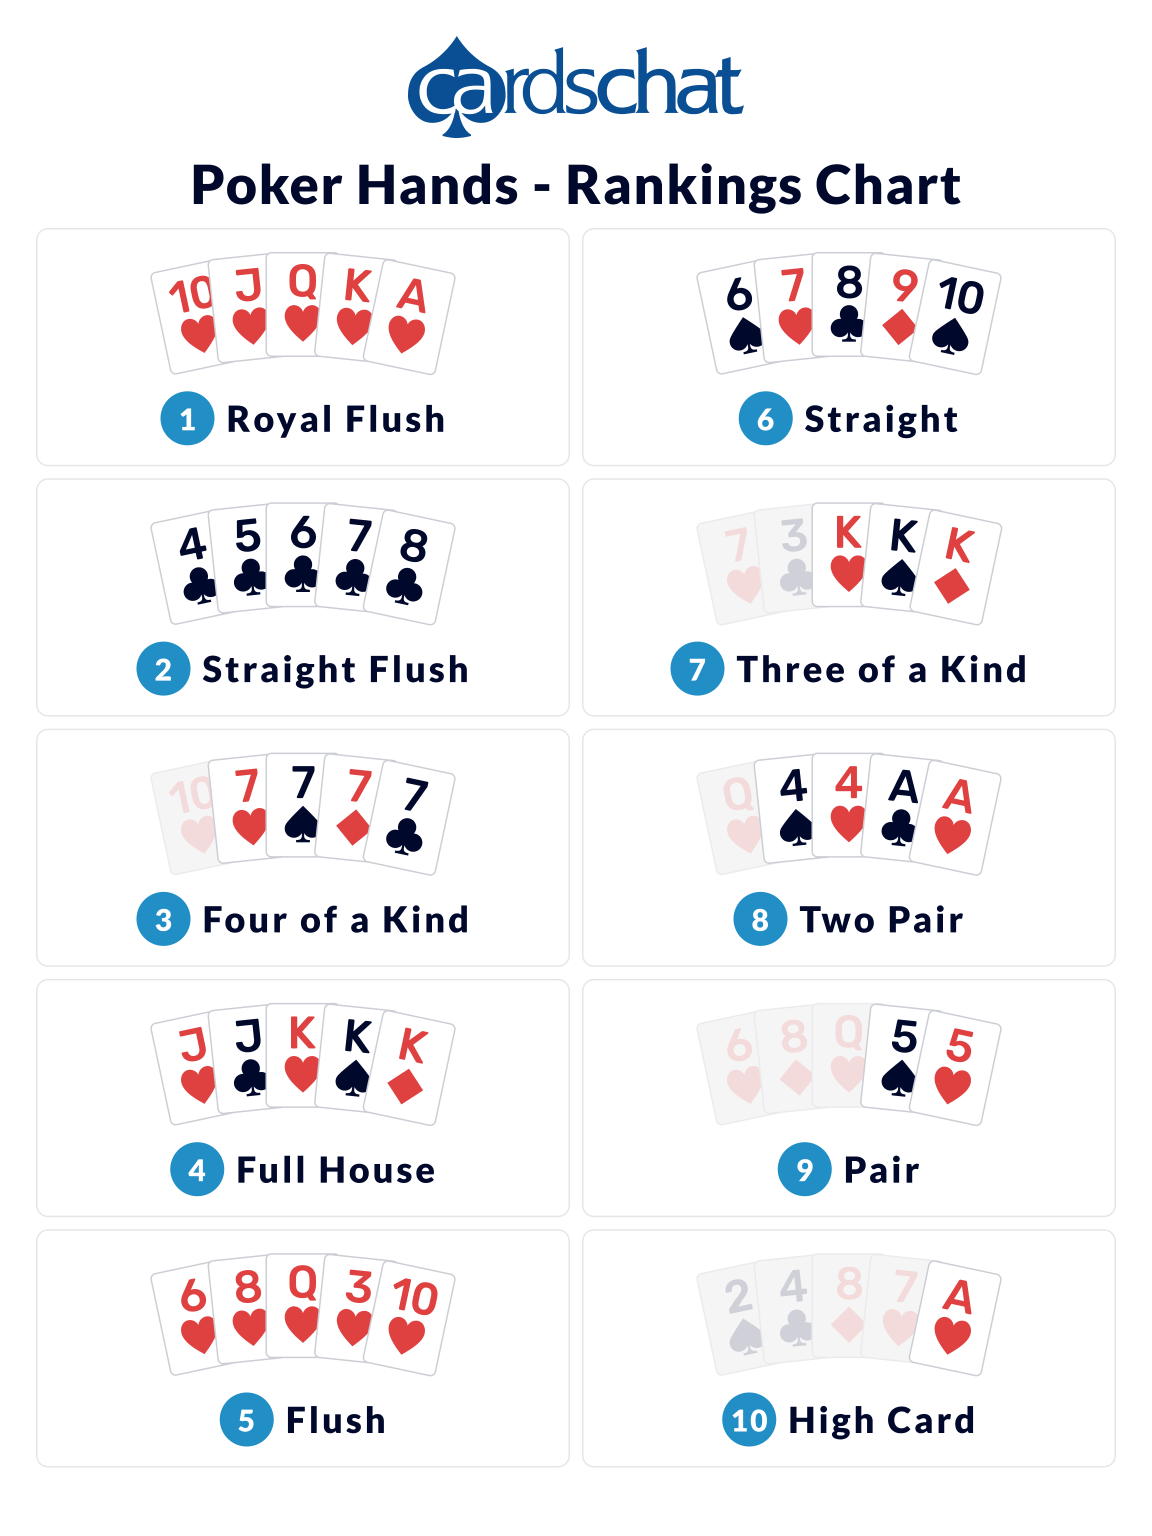 Physics Nominal Qualification Poker Hand Rankings & Poker Hands Chart ⇛ All You Need to Know